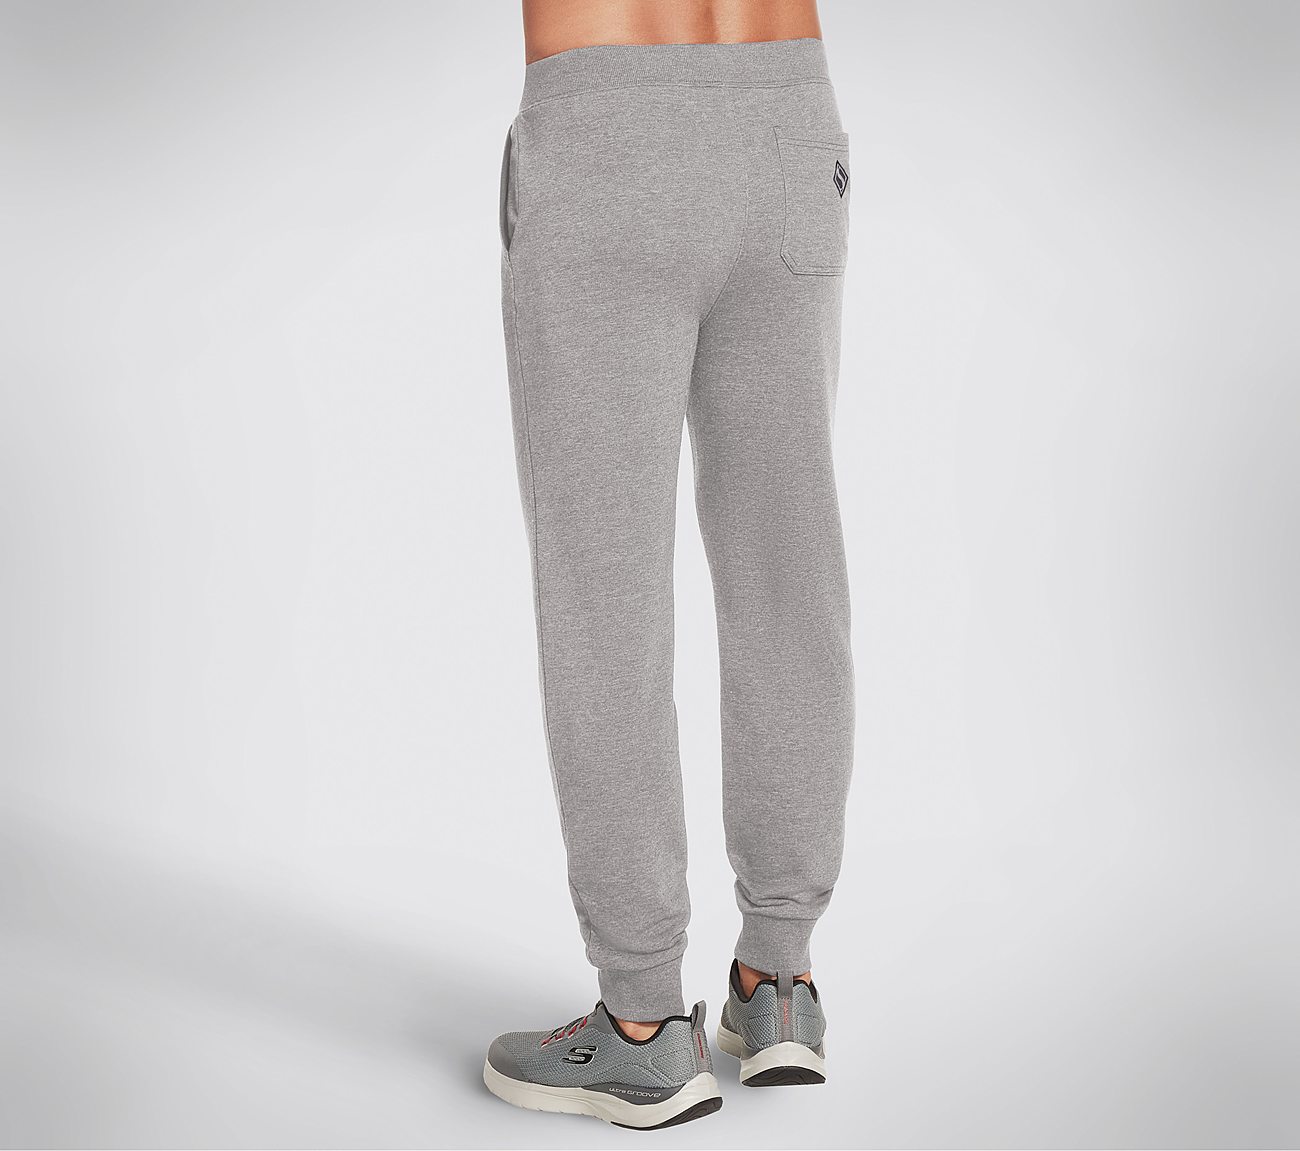 EXPEDITION JOGGER, LIGHT GREY Apparels Top View